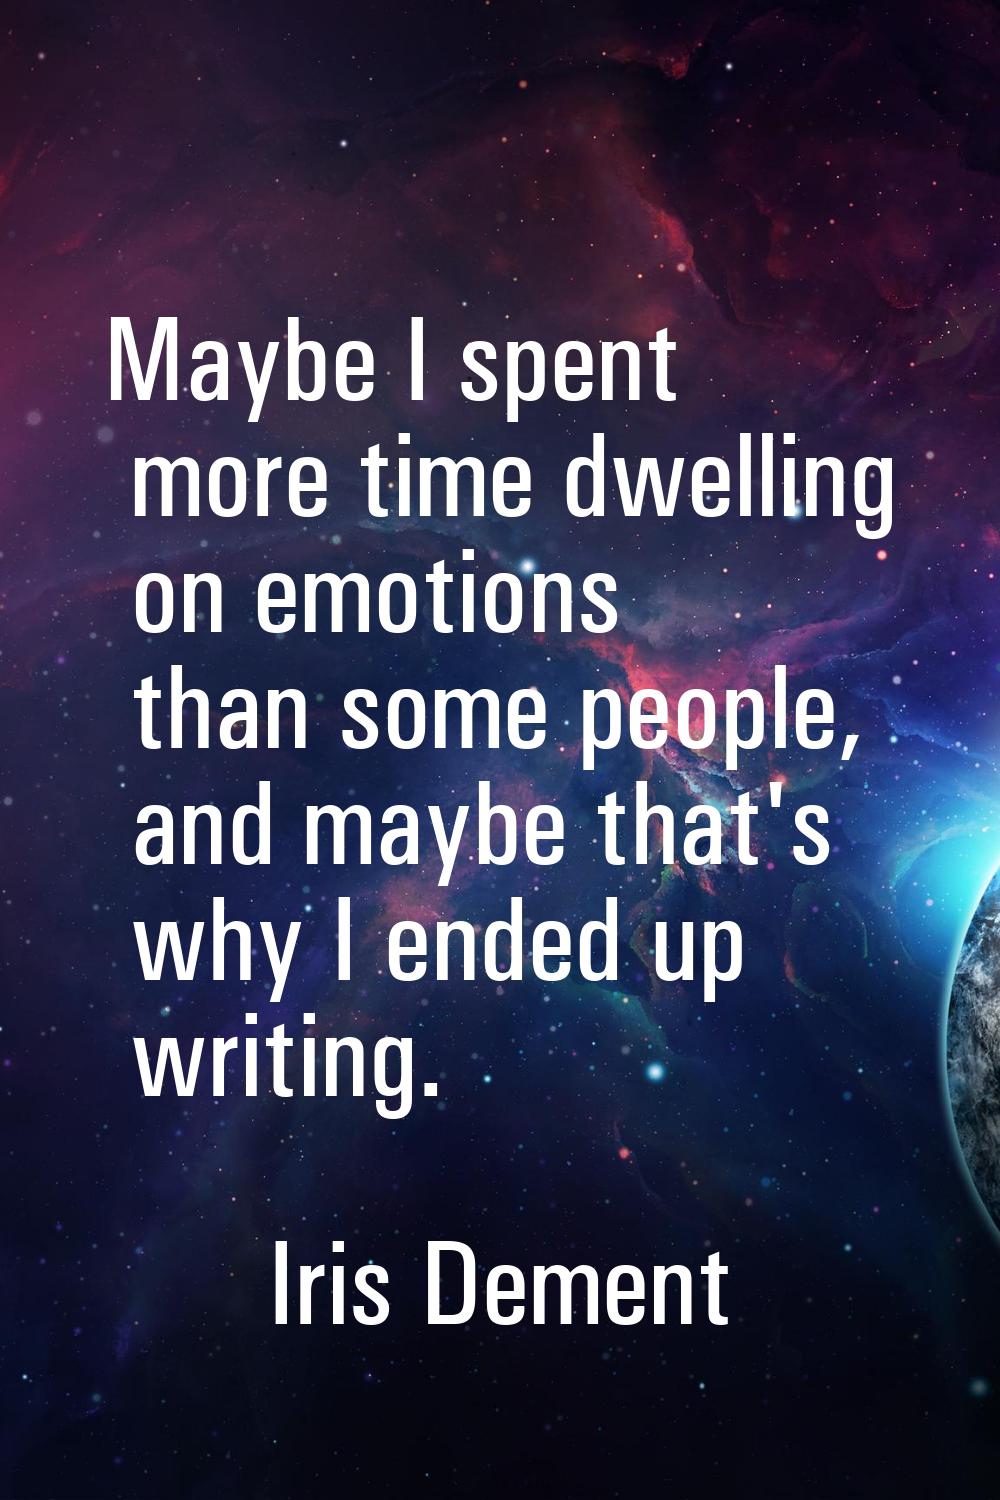 Maybe I spent more time dwelling on emotions than some people, and maybe that's why I ended up writ